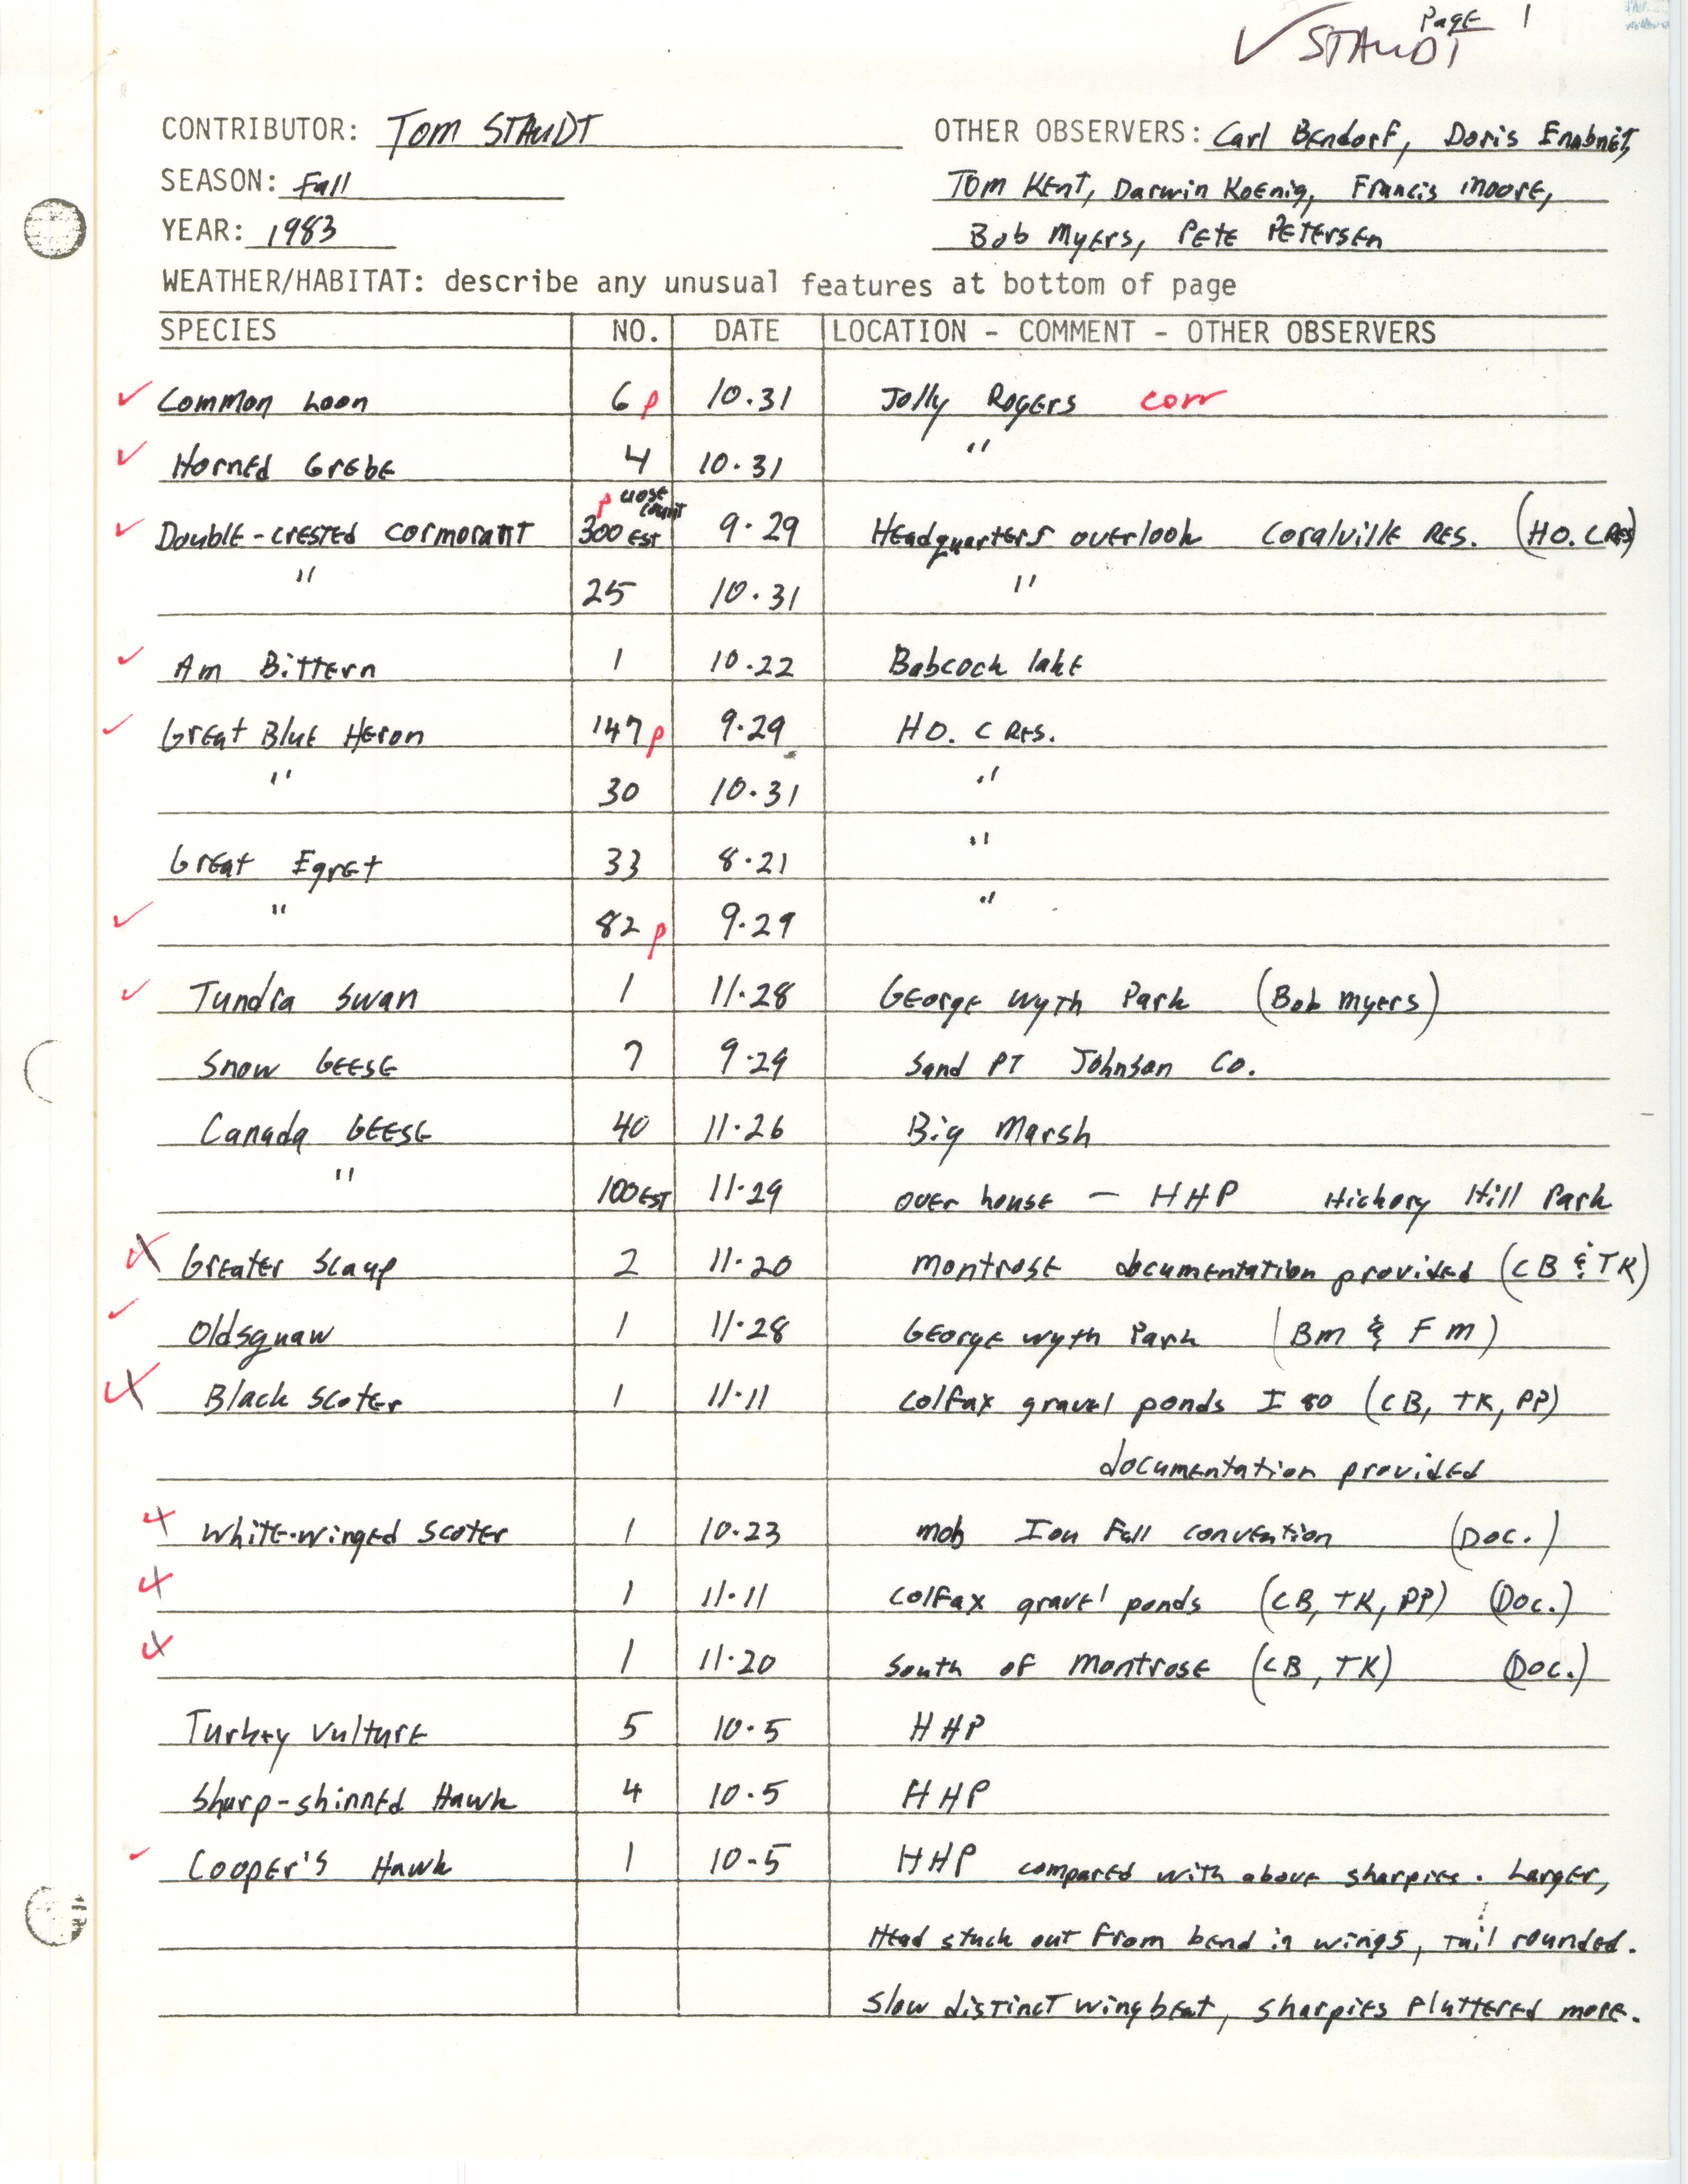 Annotated bird sighting list for fall 1983 compiled by Tom Staudt